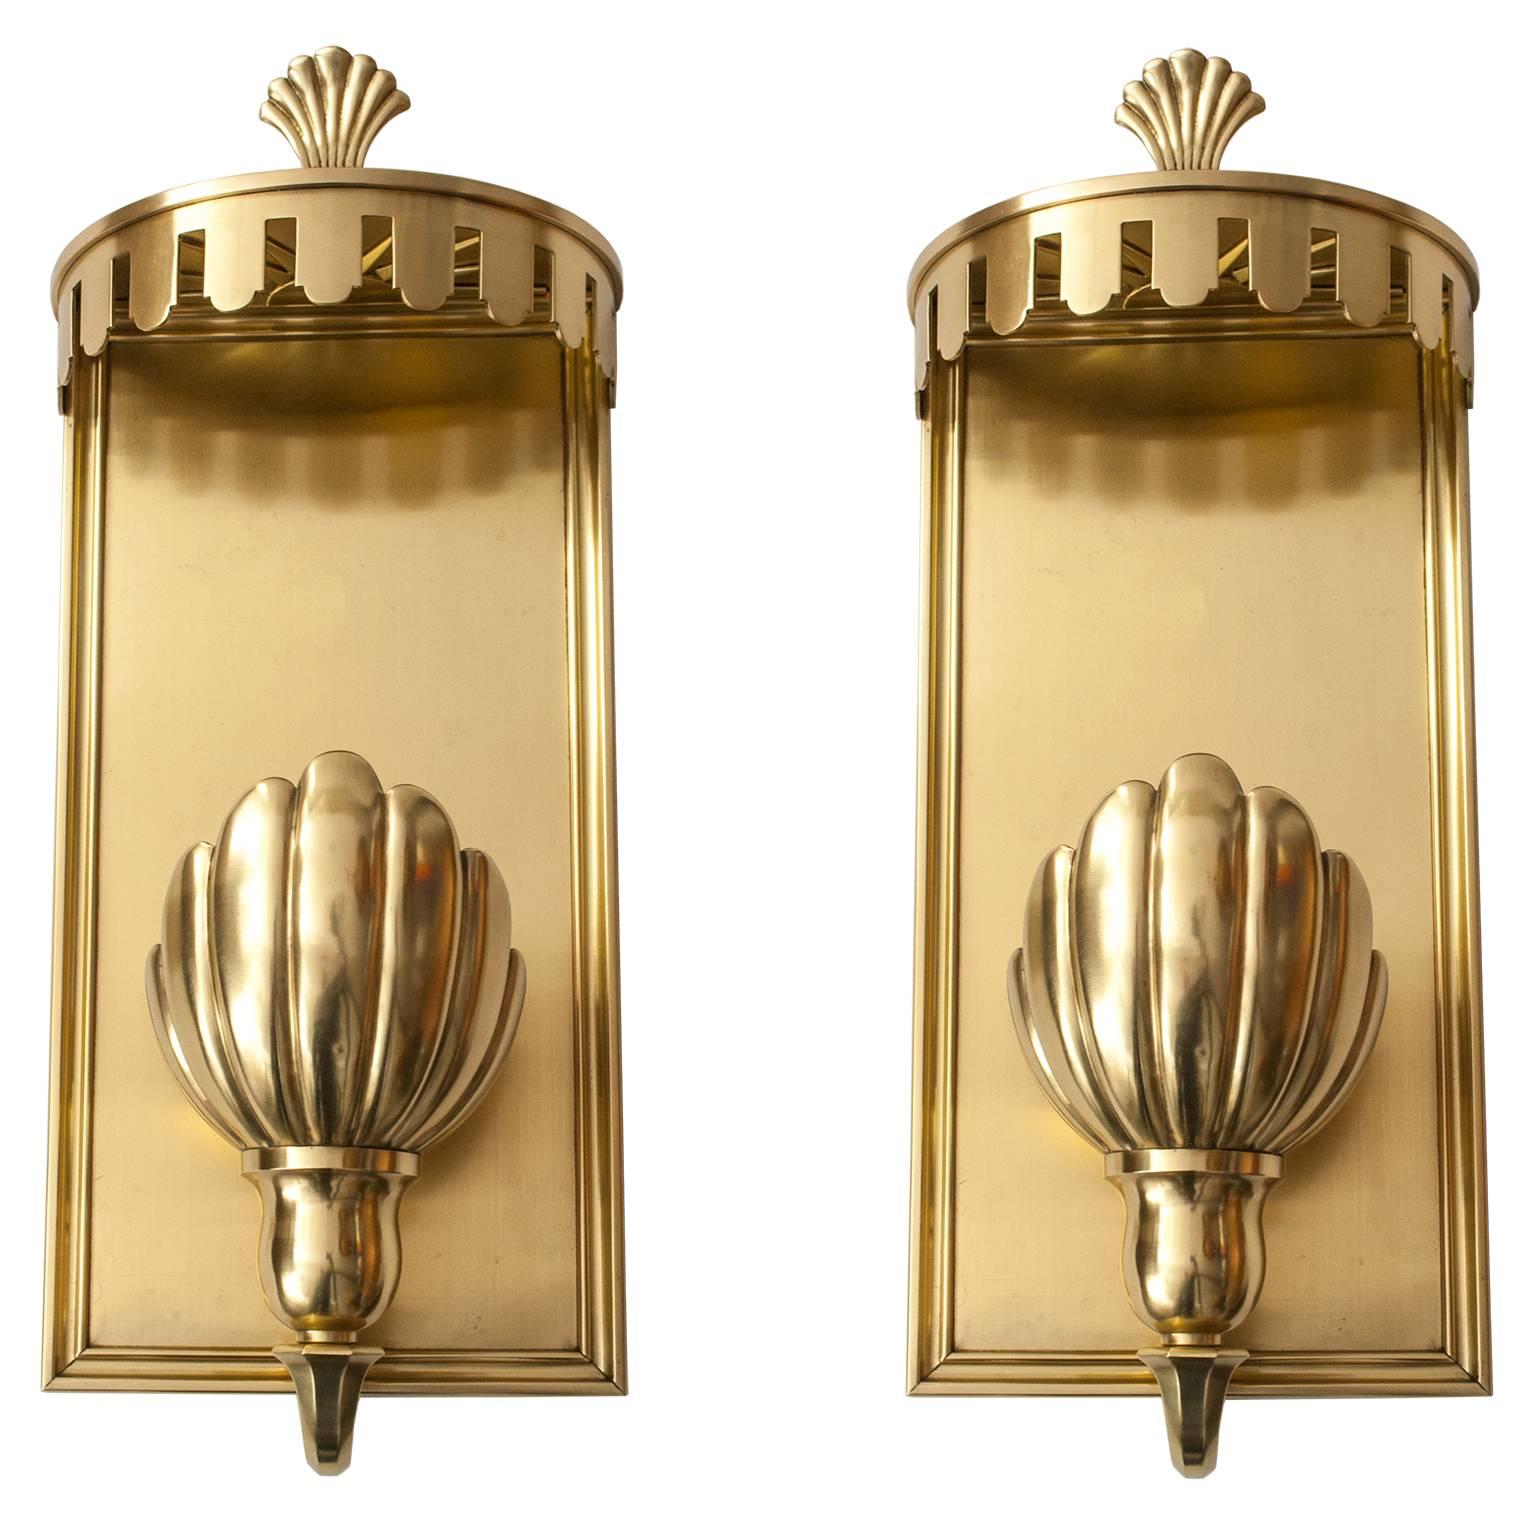 Large Pair of Swedish Grace, Art Deco Sconces in Polished Brass